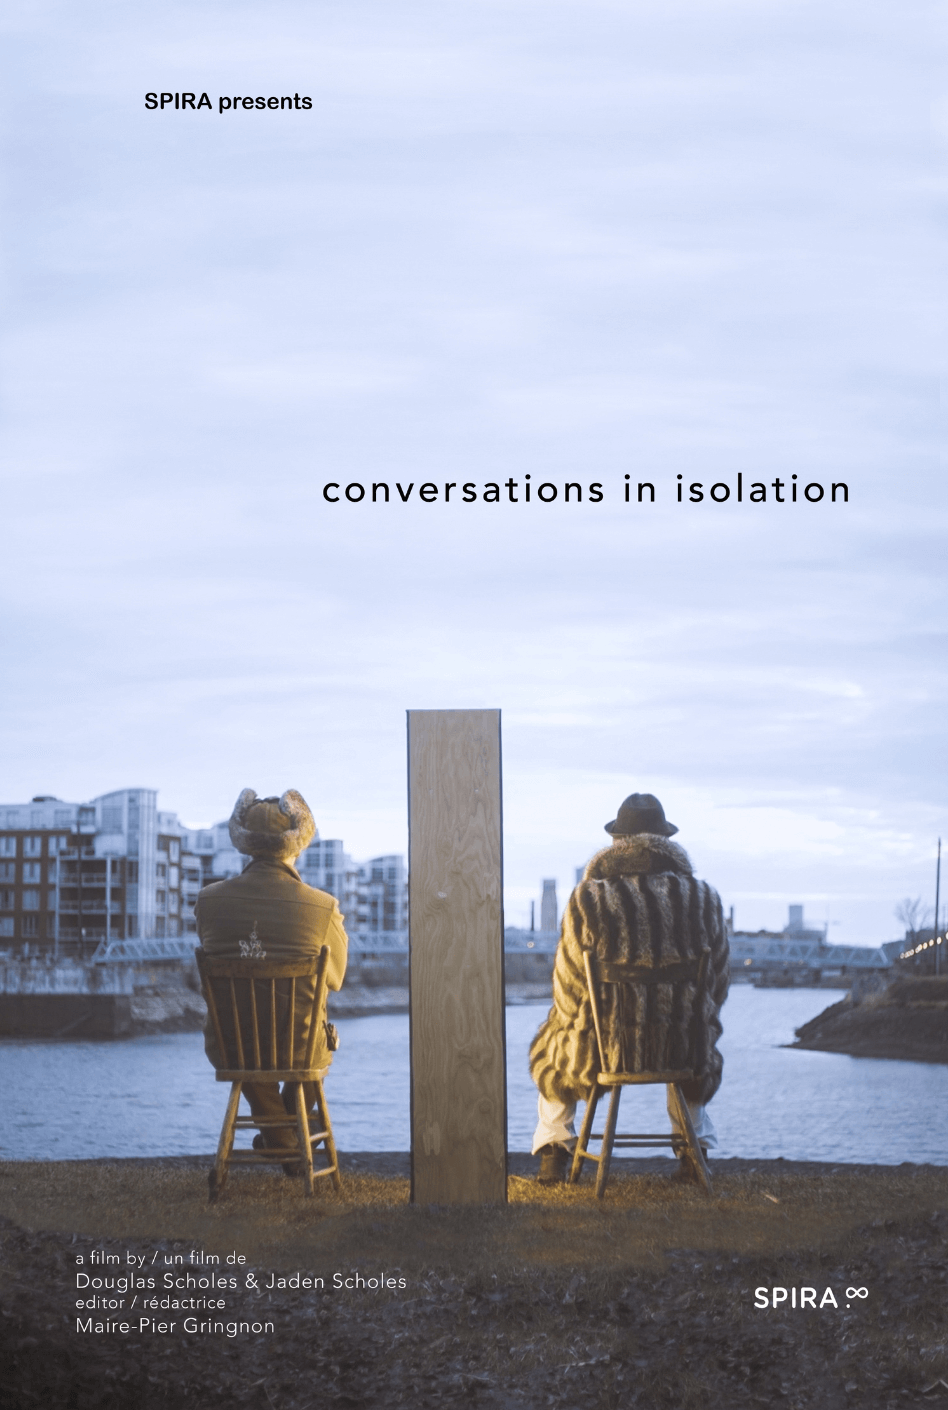 images/bottin_films/da79140102cbb2ae6a66b51eca3eb7f8-Conversations-in-isolation-affiche-poster.png#joomlaImage://local-images/bottin_films/da79140102cbb2ae6a66b51eca3eb7f8-Conversations-in-isolation-affiche-poster.png?width=948&height=1410